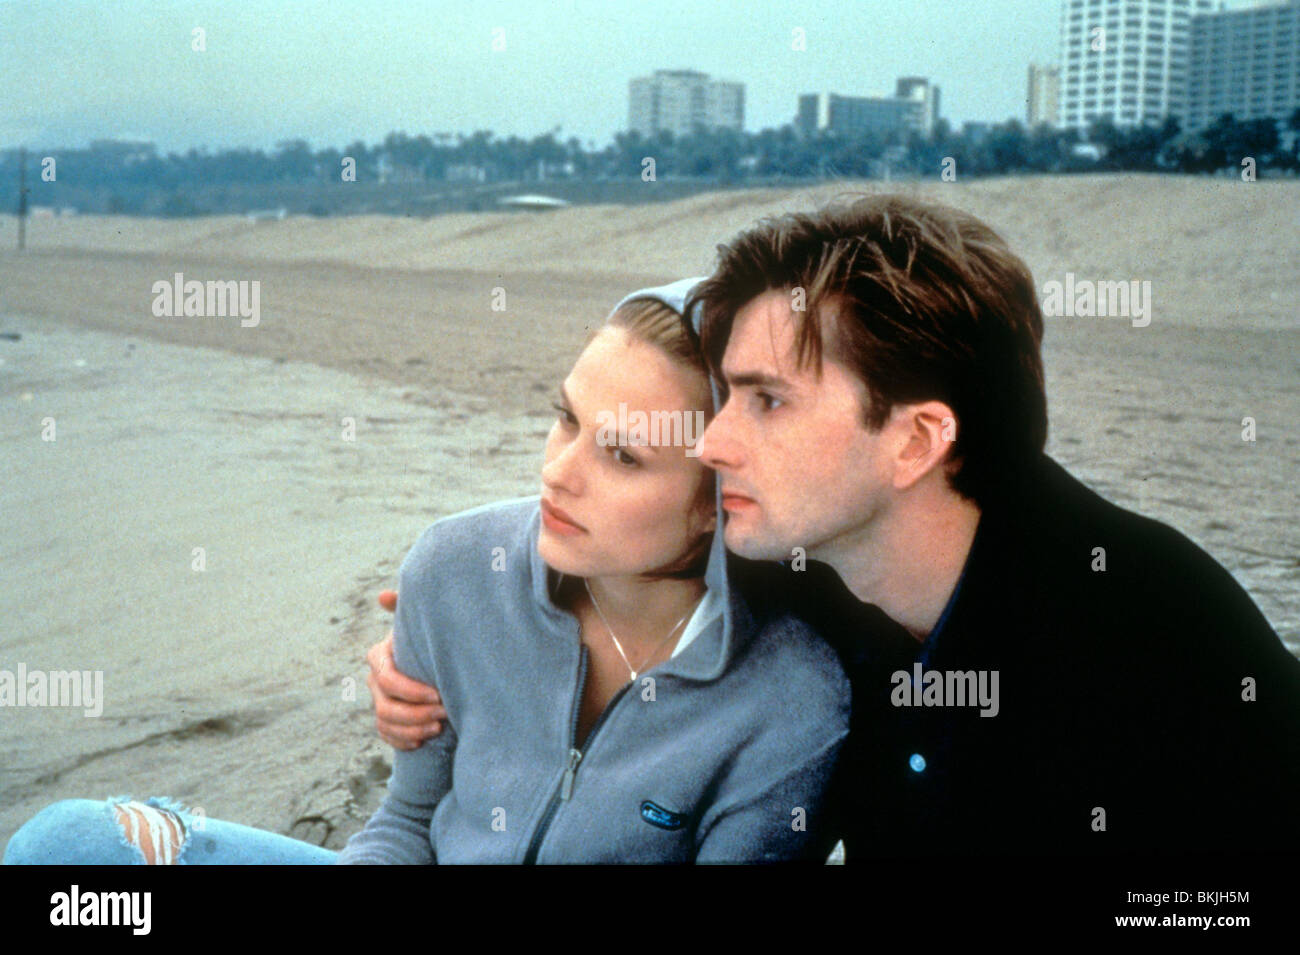 L.A. WITHOUT A MAP (1998) VINESSA SHAW, DAVID TENNANT LAMP 002 Stock Photo